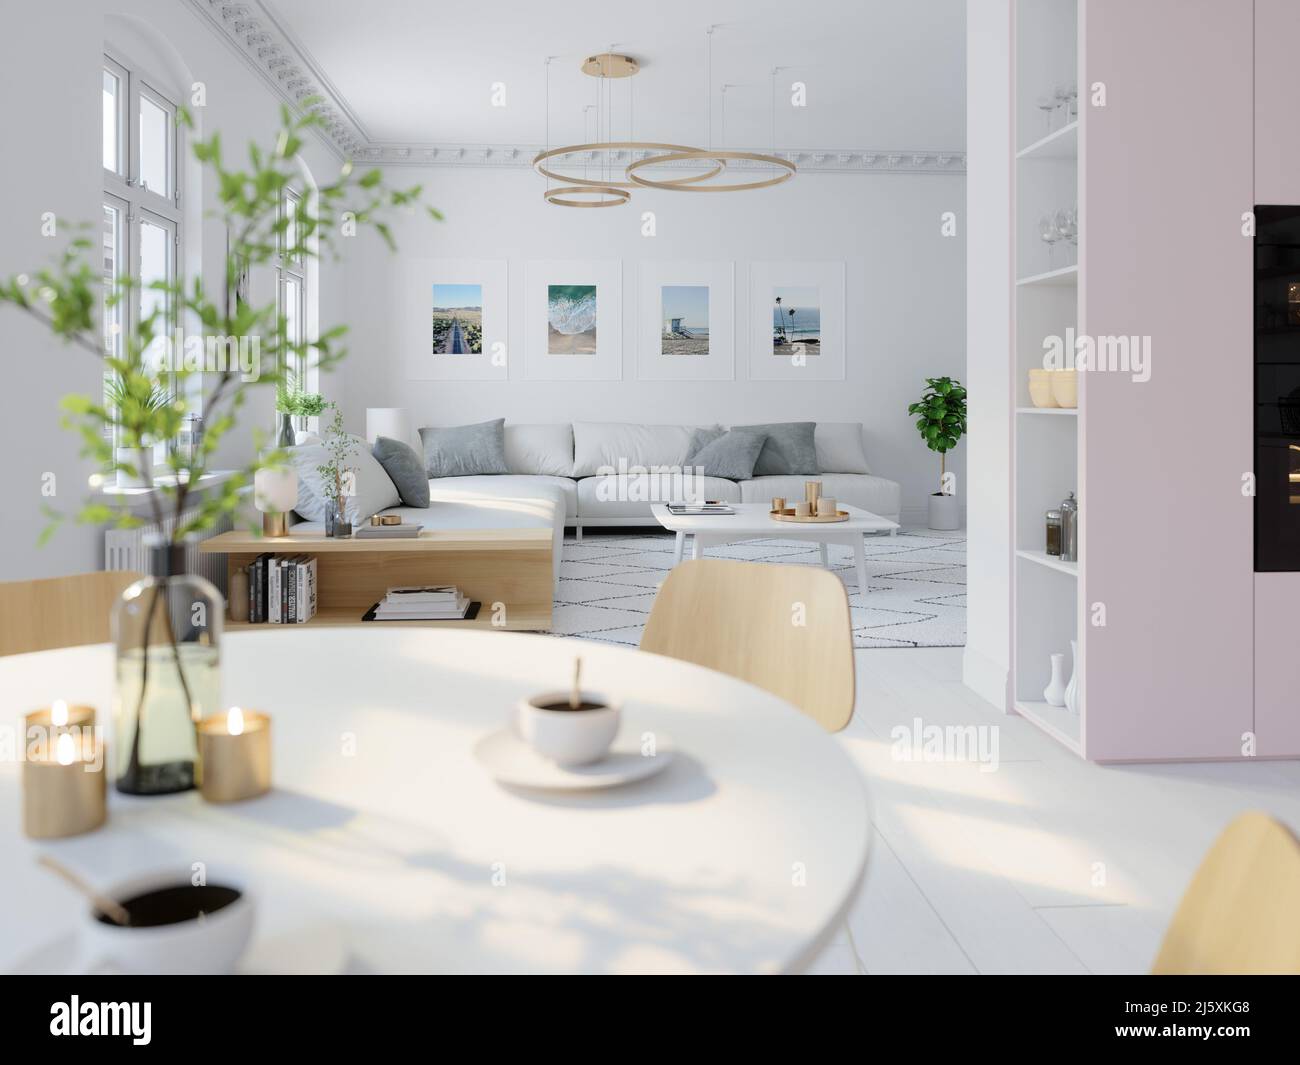 3D illustration. nordic style kitchen in an apartment. Stock Photo